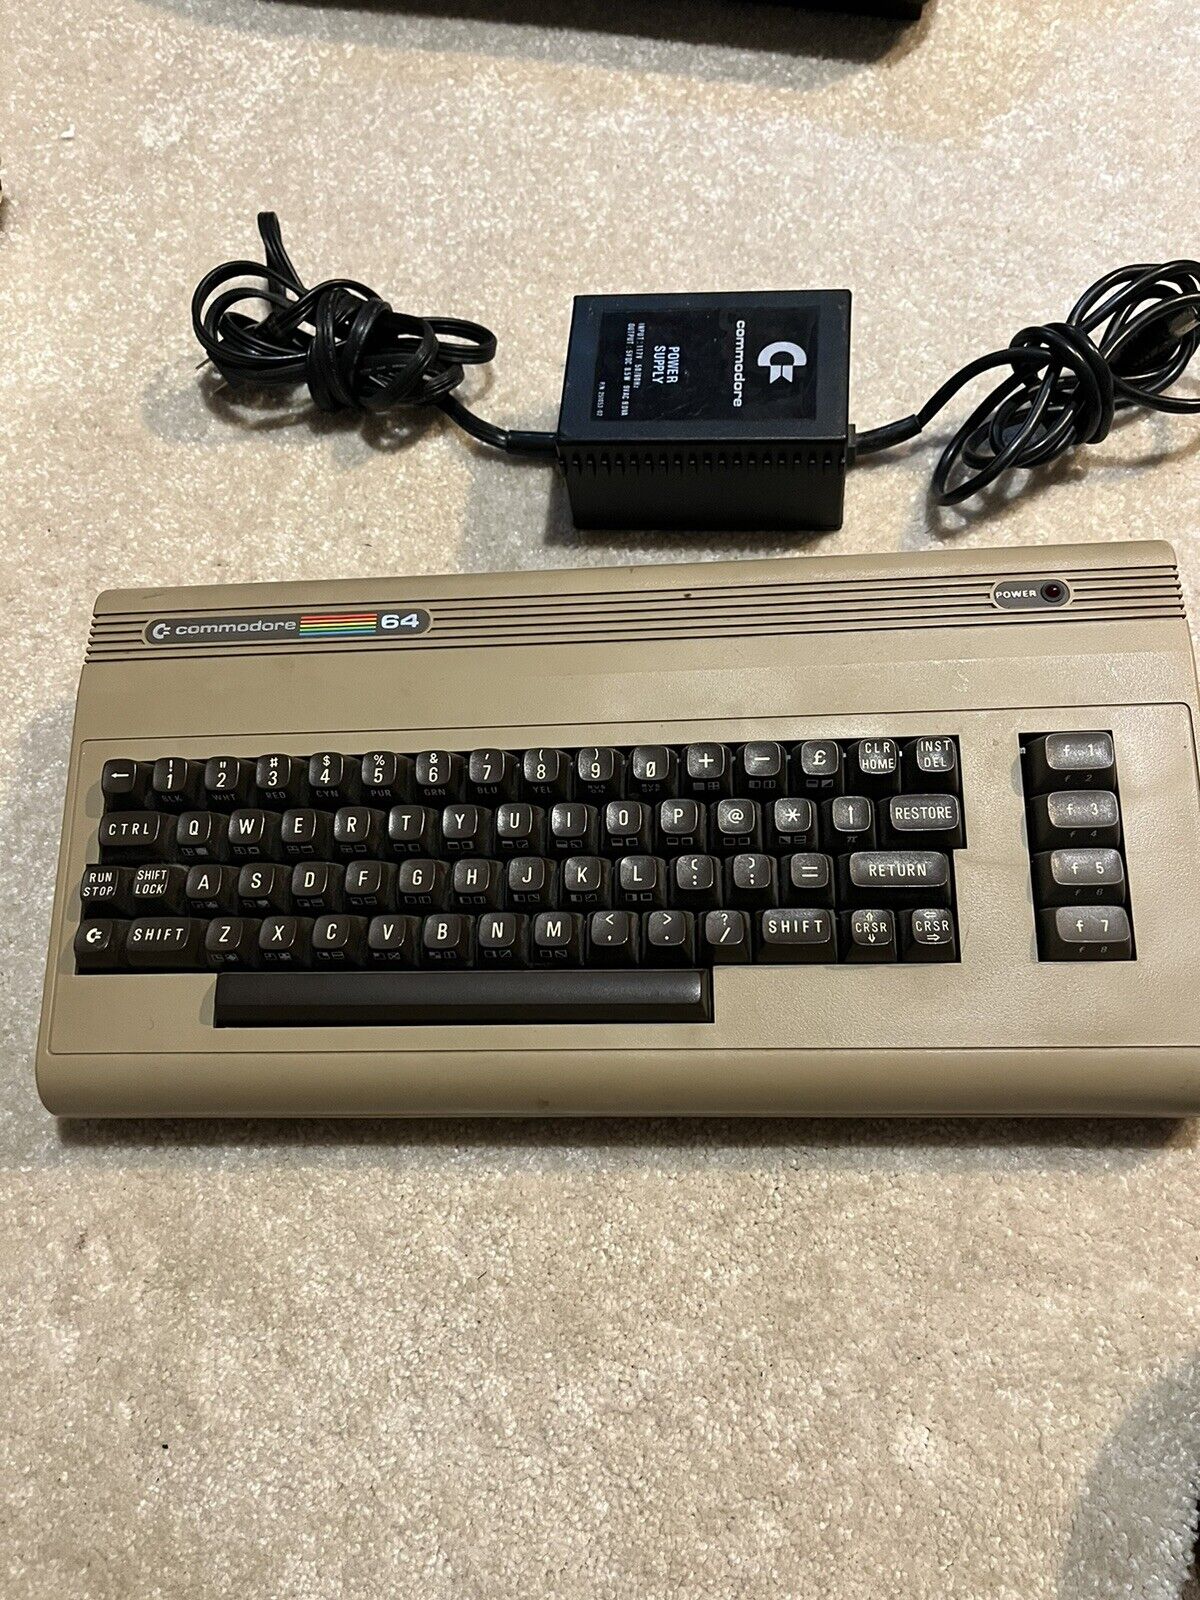 Vintage Commodore 64 Personal Computer - Tested and working Breadbin